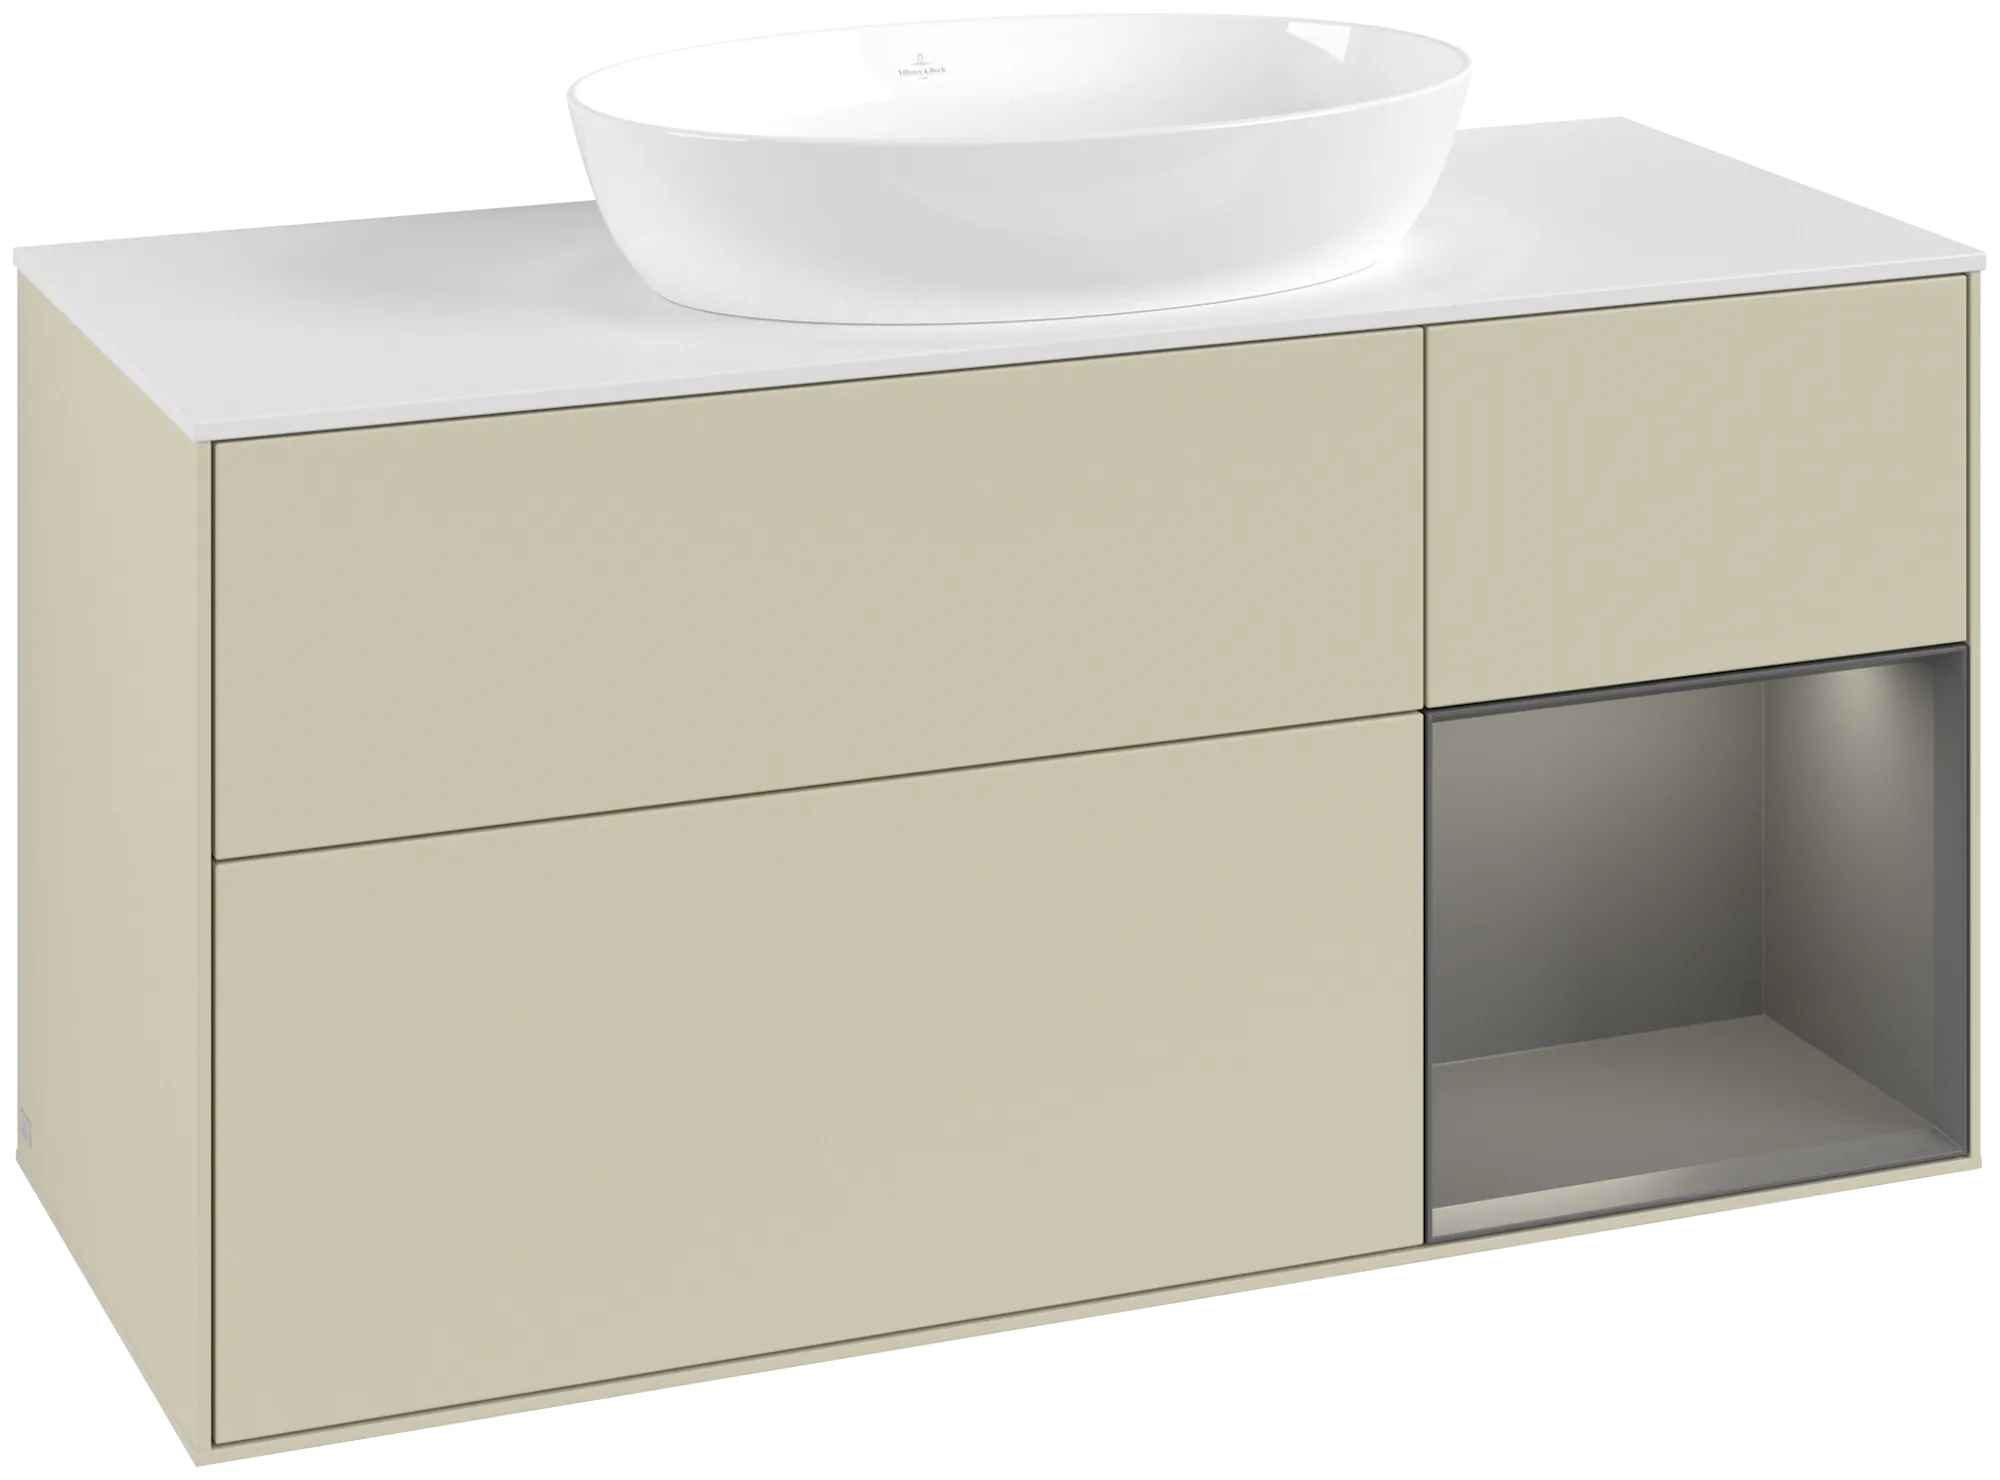 Picture of VILLEROY BOCH Finion Vanity unit, with lighting, 3 pull-out compartments, 1200 x 603 x 501 mm, Silk Grey Matt Lacquer / Anthracite Matt Lacquer / Glass White Matt #FA71GKHJ